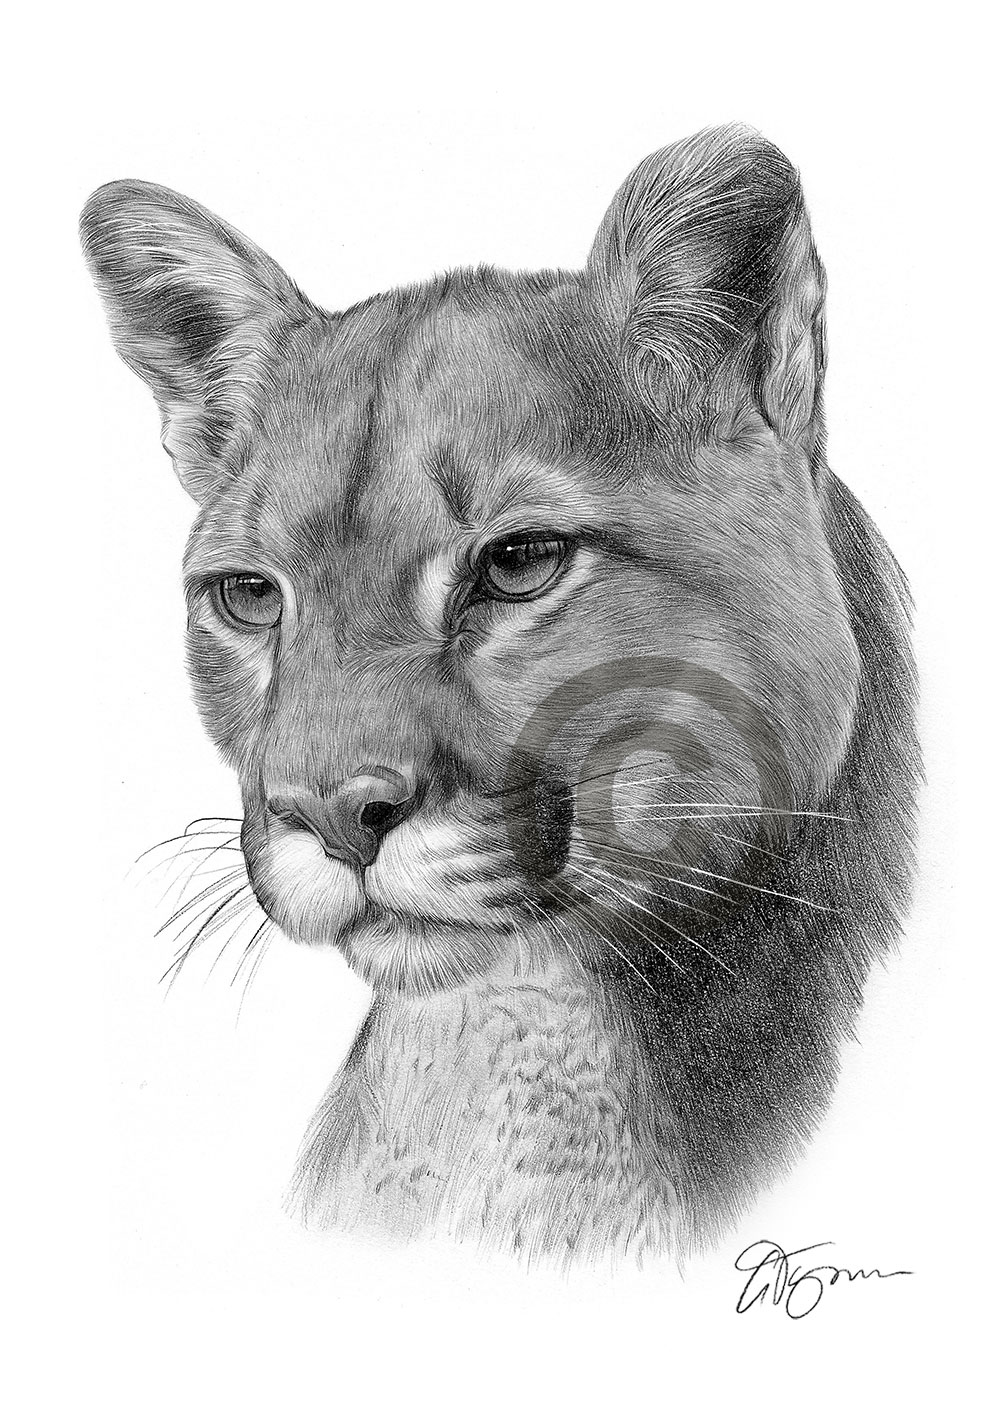 Pencil drawing of a cougar by UK artist Gary Tymon